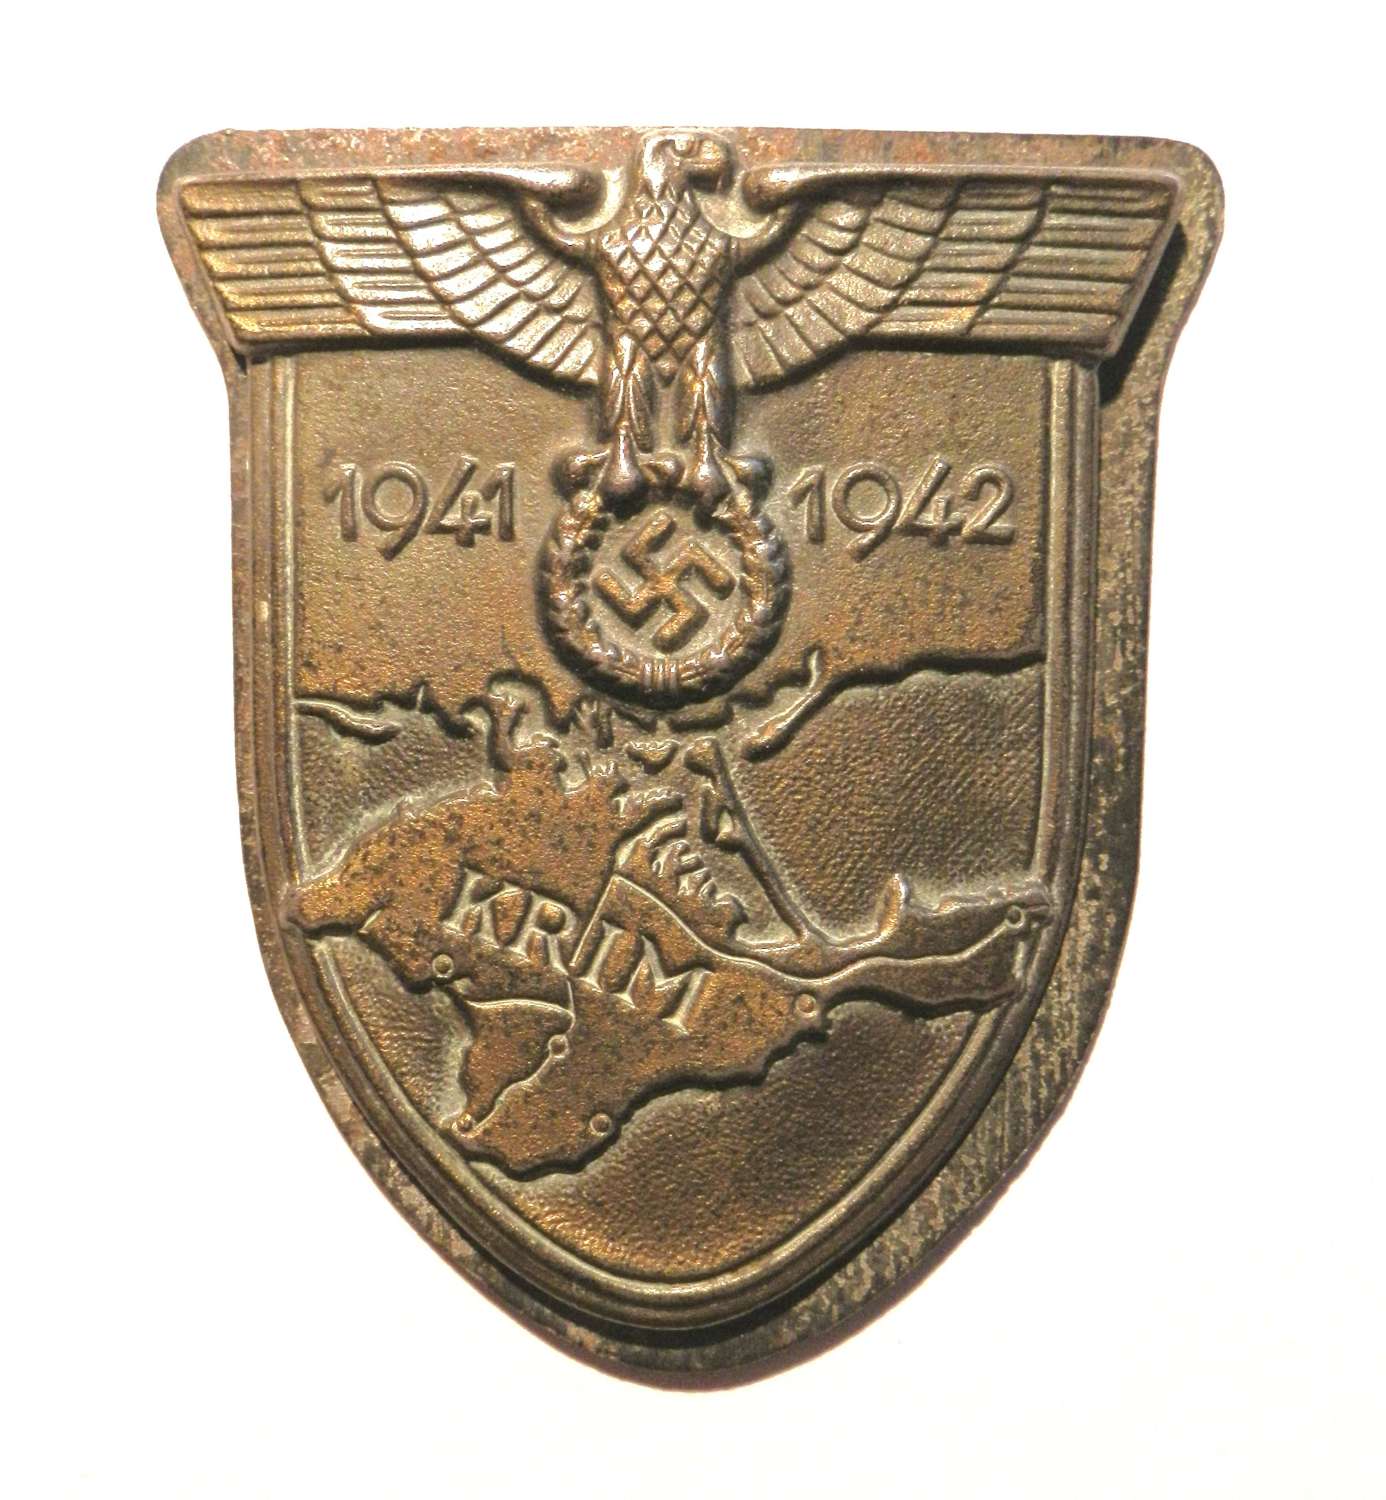 Krim Campaign Shield, WH (Heeres, Waffen) issue.